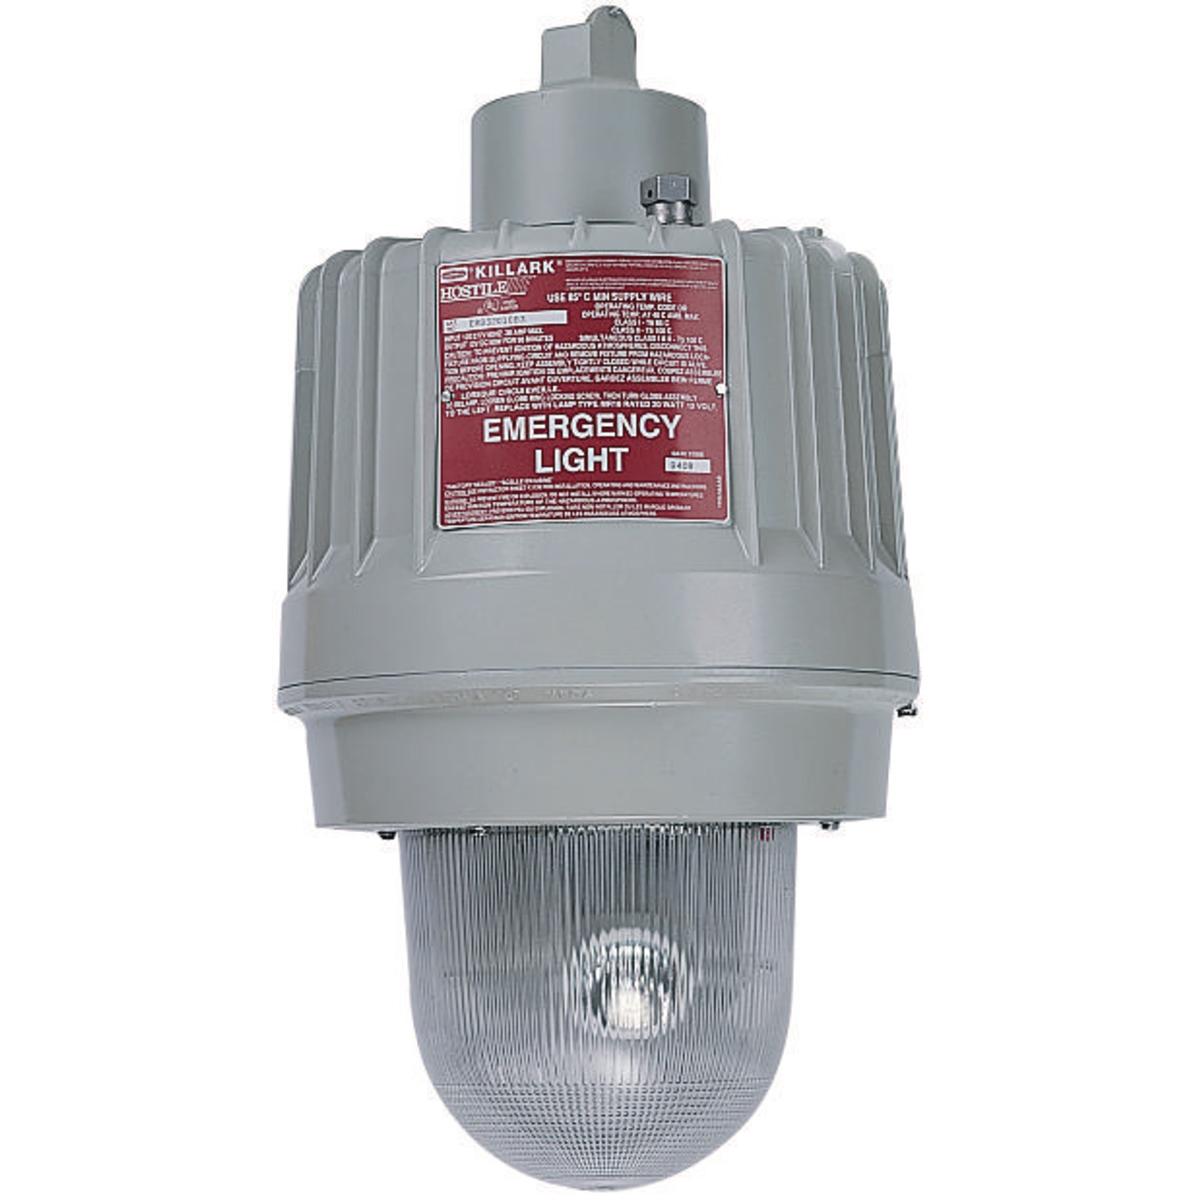 Hubbell EBB32010B3-TDR Emergency Hazardous Location 1" Wall Mount with 15 min Time Delay  ; Patented design three high intensity lamps can be independently adjusted to provide custom emergency lighting to a specific area ; Three 20 watt MR16 lamps included ; Pendant, bracket an